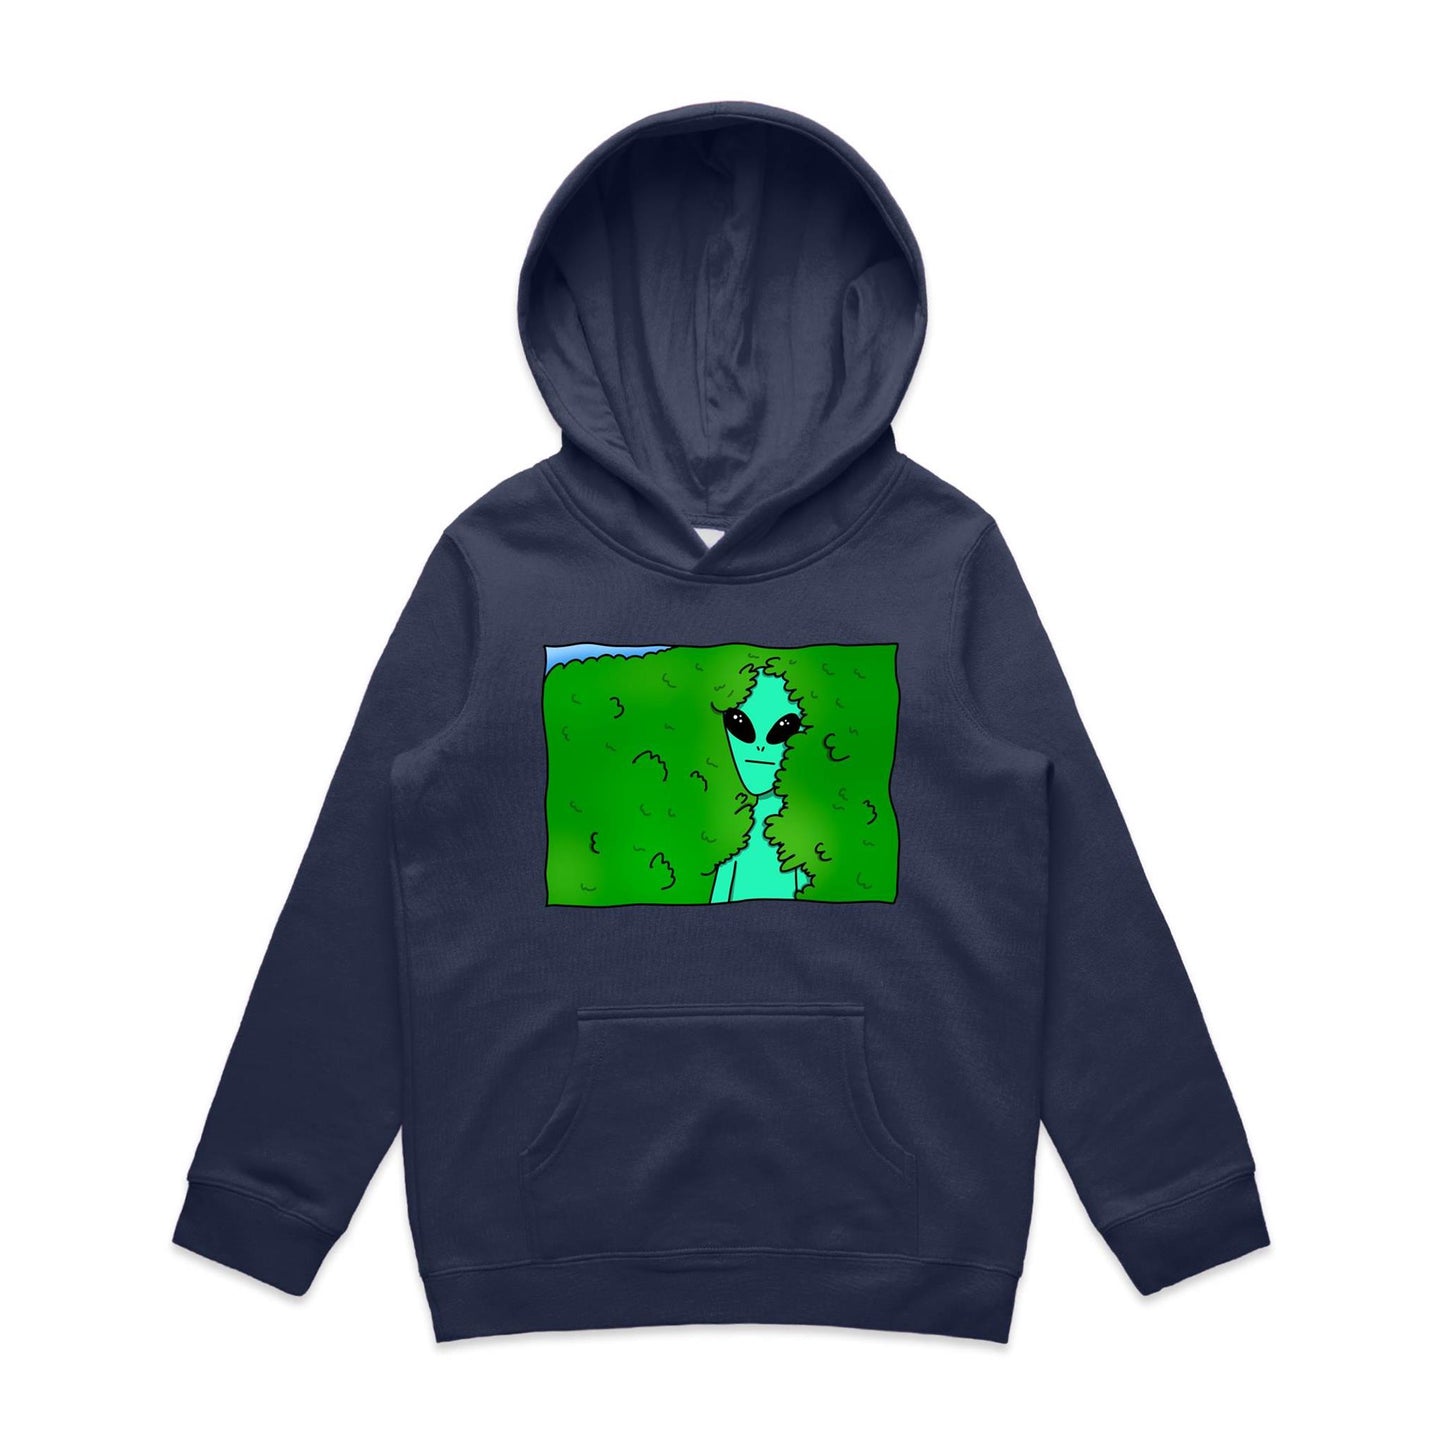 Alien Backing Into Hedge Meme - Youth Supply Hood Midnight Blue Kids Hoodie Funny Sci Fi